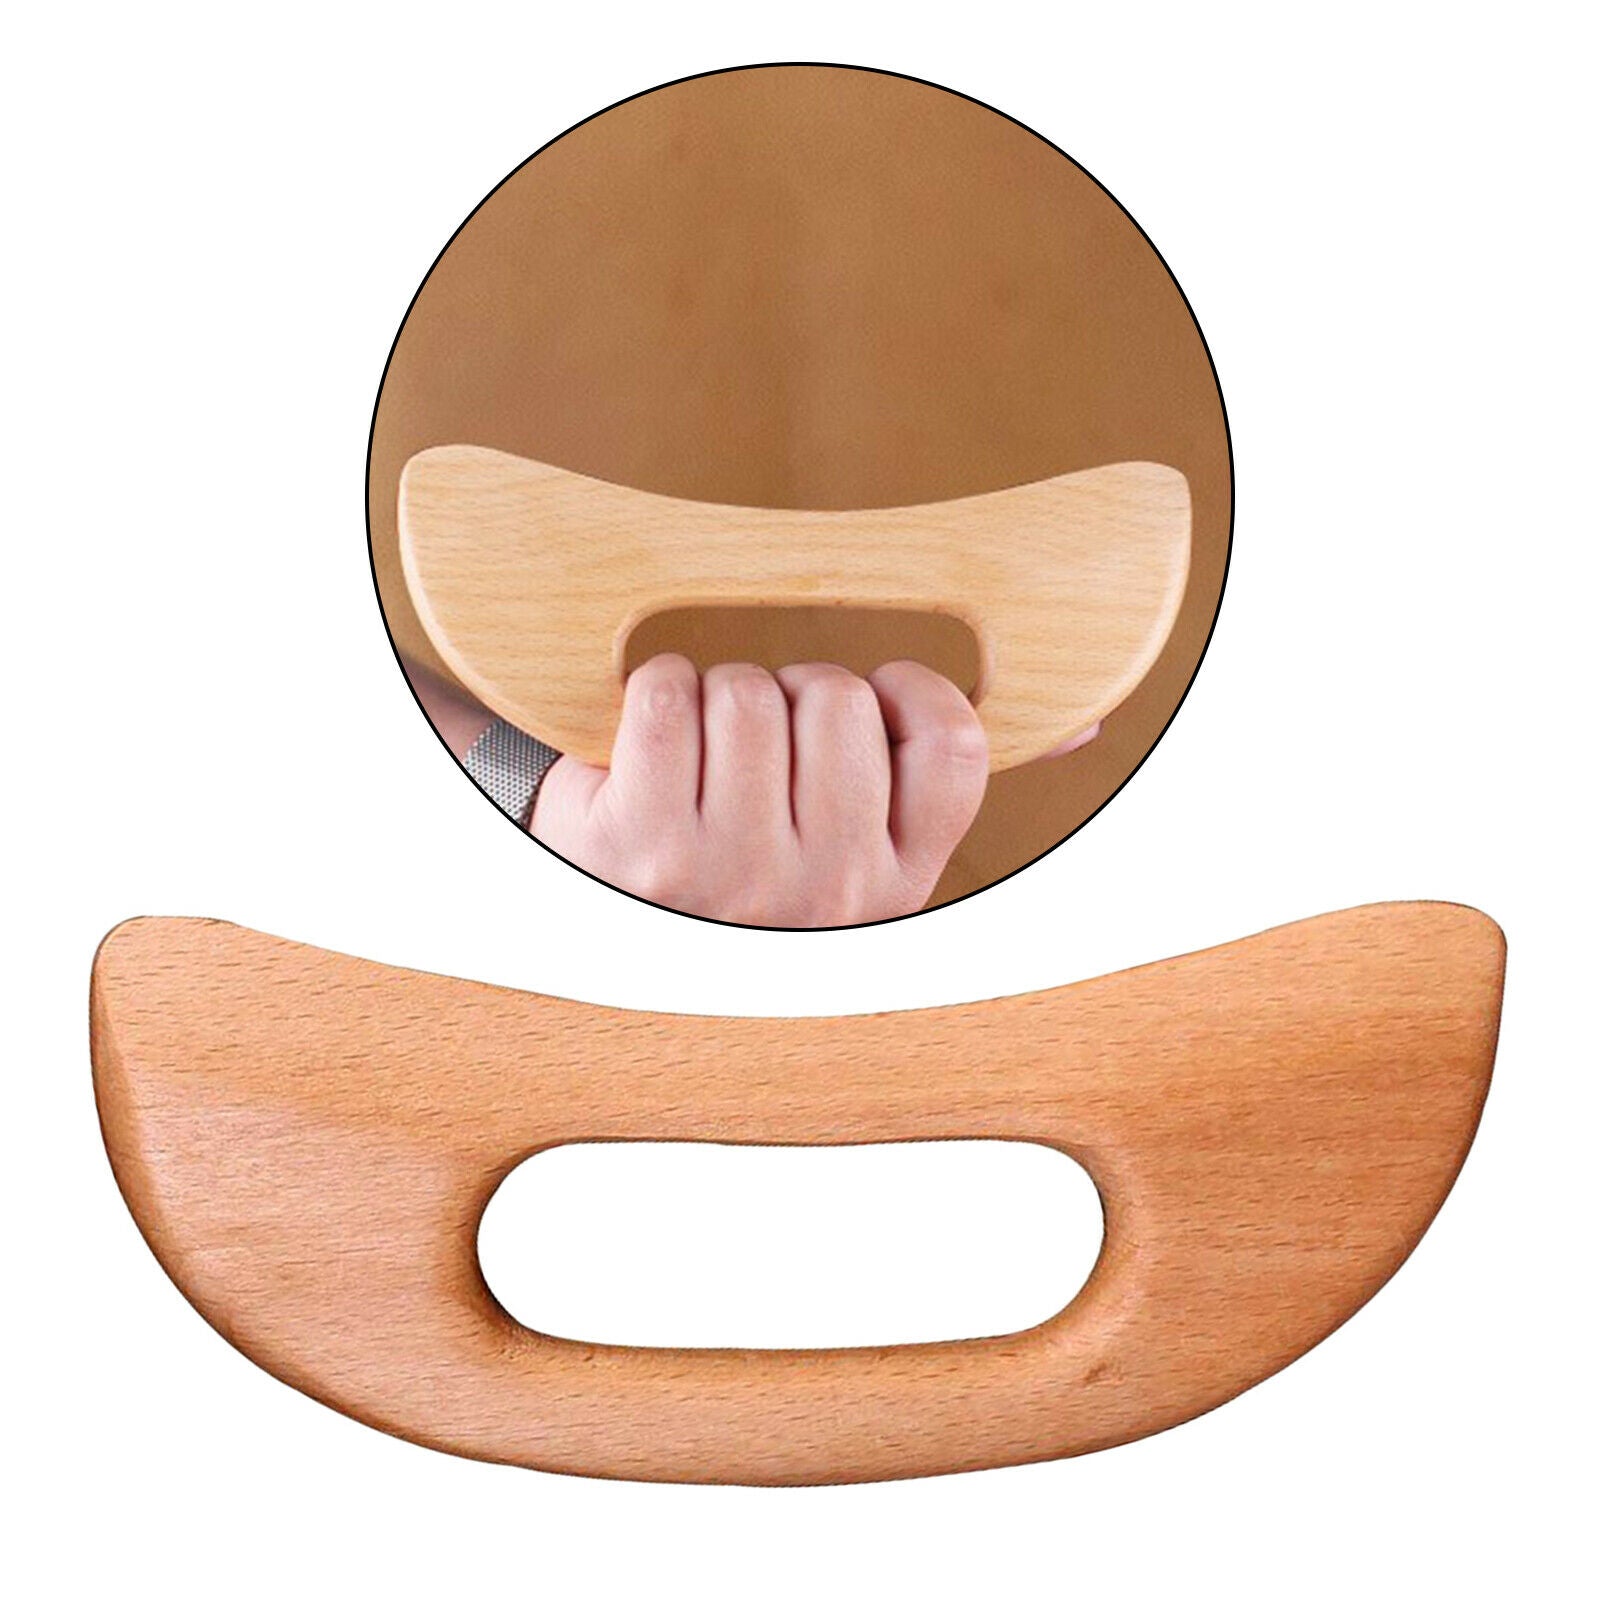 Beech Gua sha Massage Tool for Soft Tissue Release Legs Arms Shoulder Pain